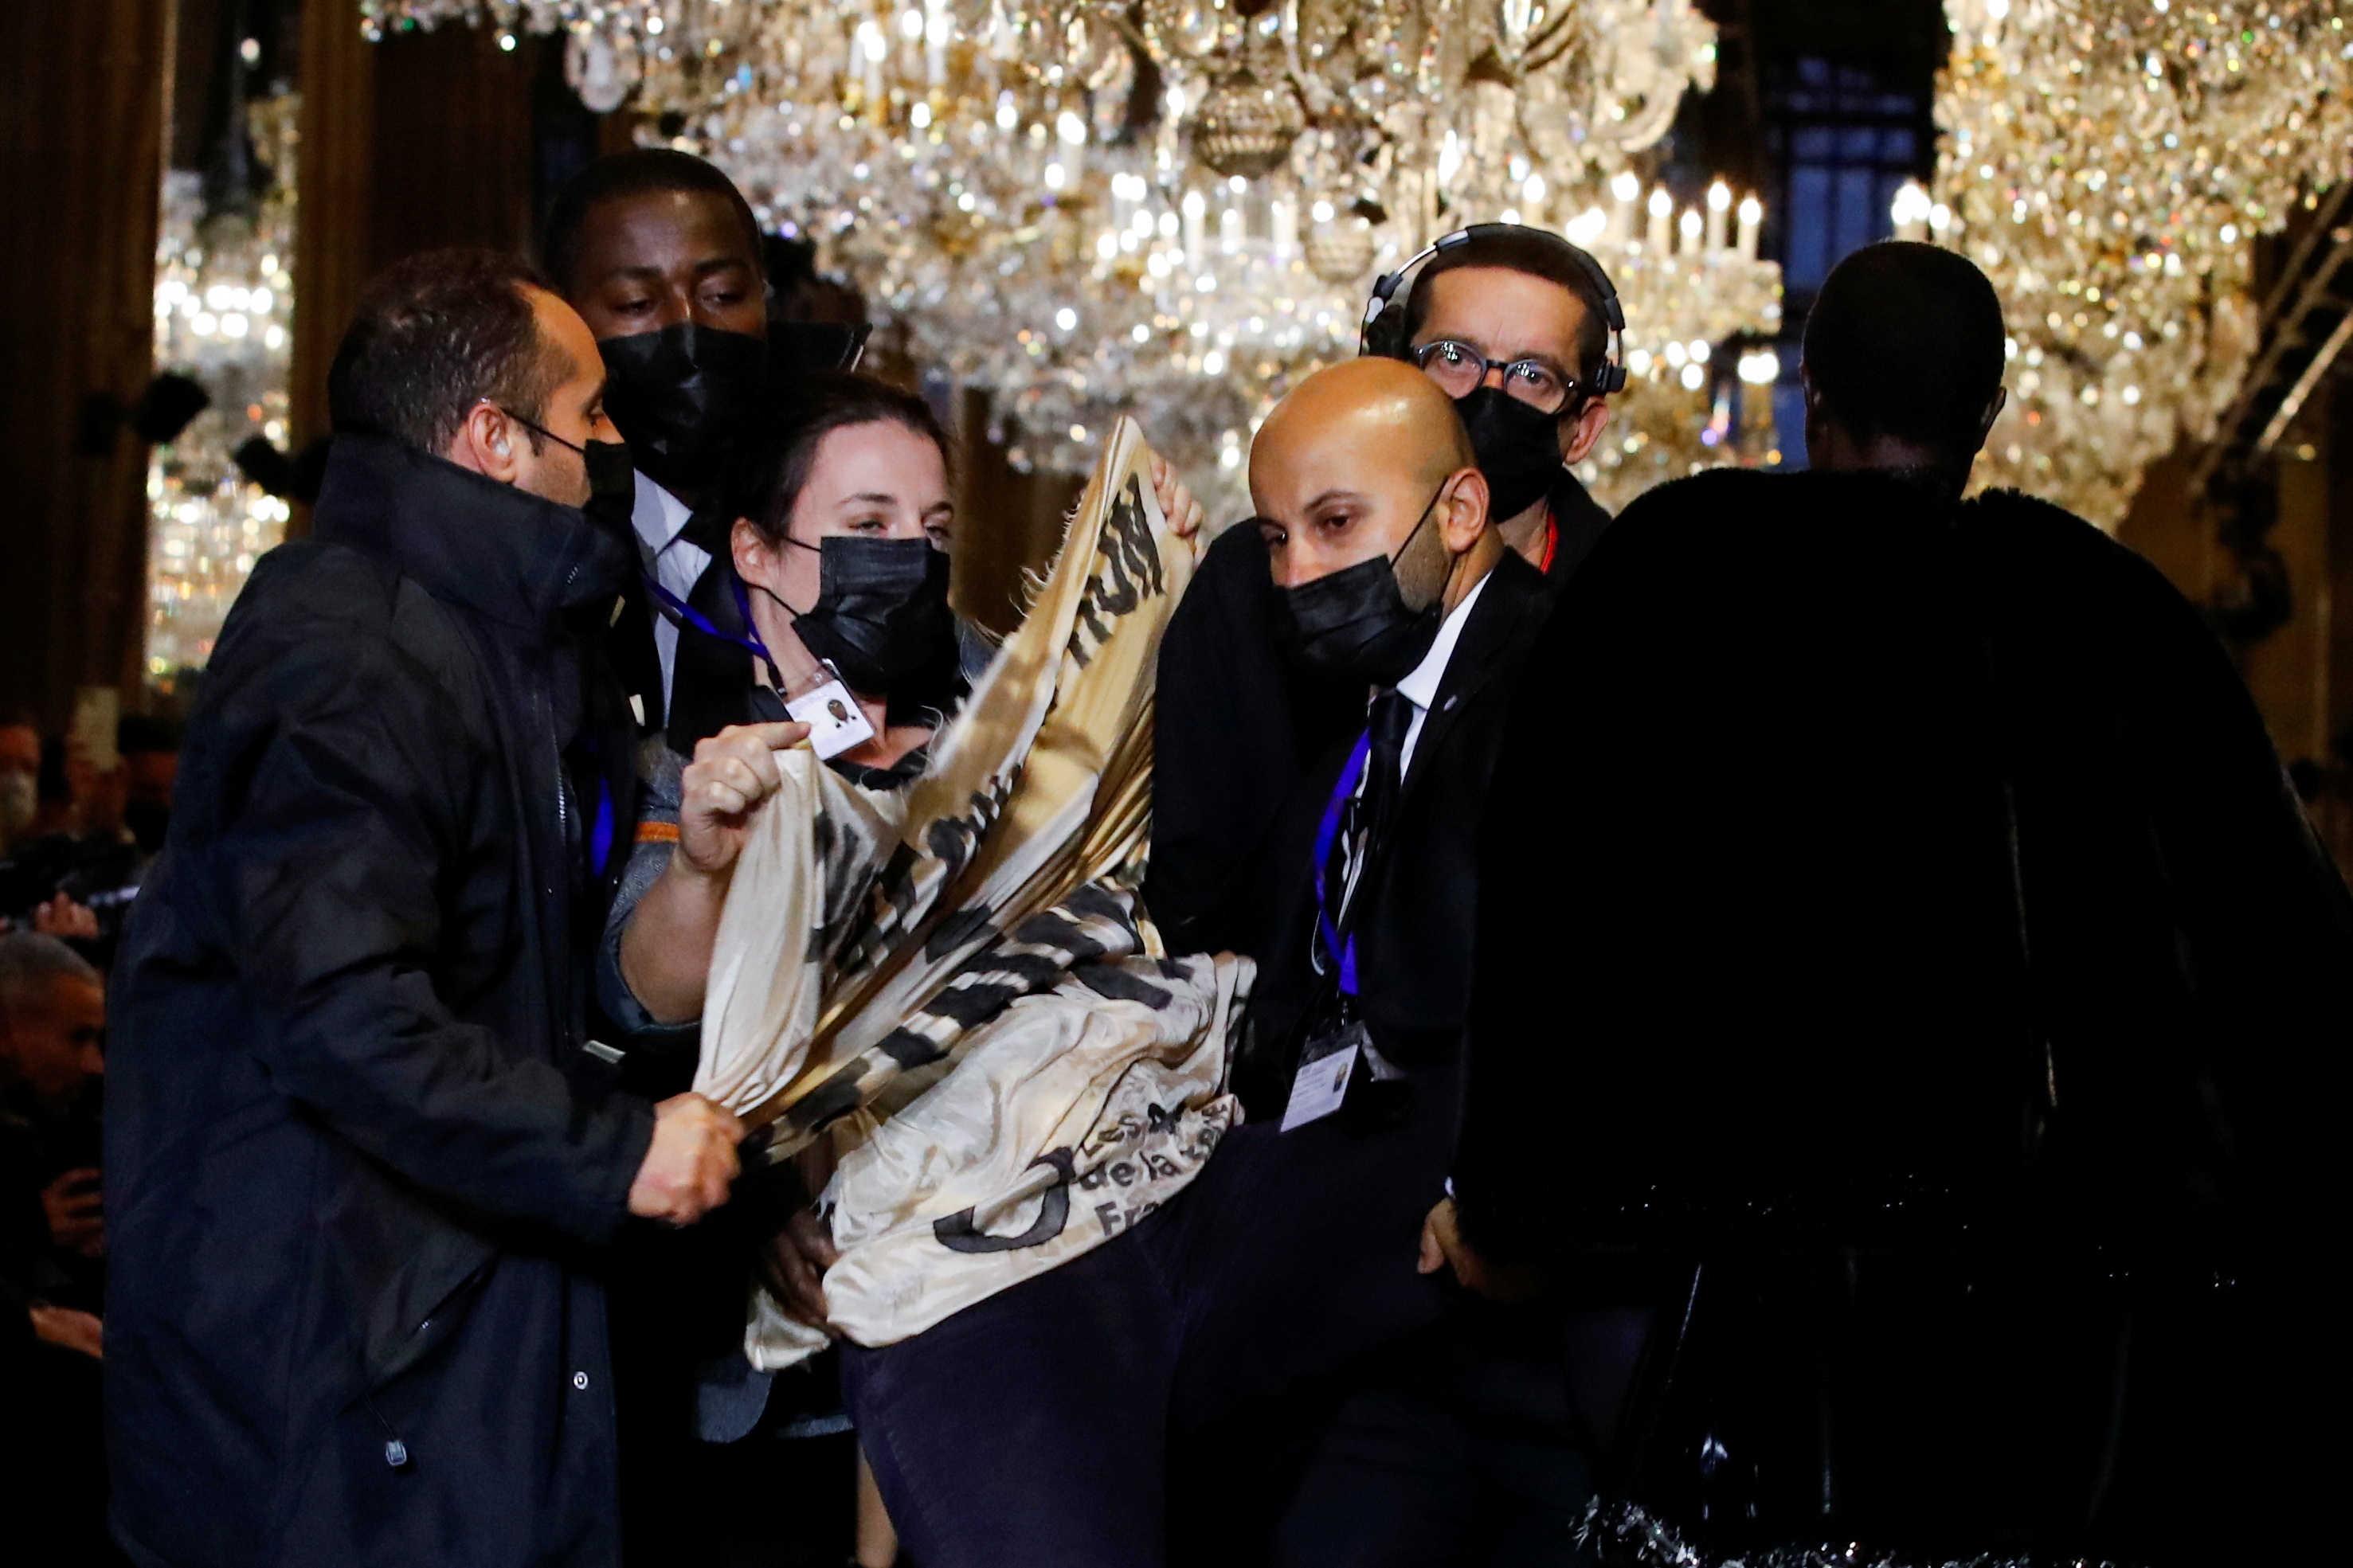 Security personnel remove an activist belonging to the 'Les Amis de la Terre France' or 'Friends of the Earth - France' , who crashed the designer Nicolas Ghesquiere Spring/Summer 2022 women's ready-to-wear collection show for fashion house Louis Vuitton during Paris Fashion Week in Paris, France, October 5, 2021. REUTERS/Gonzalo Fuentes 